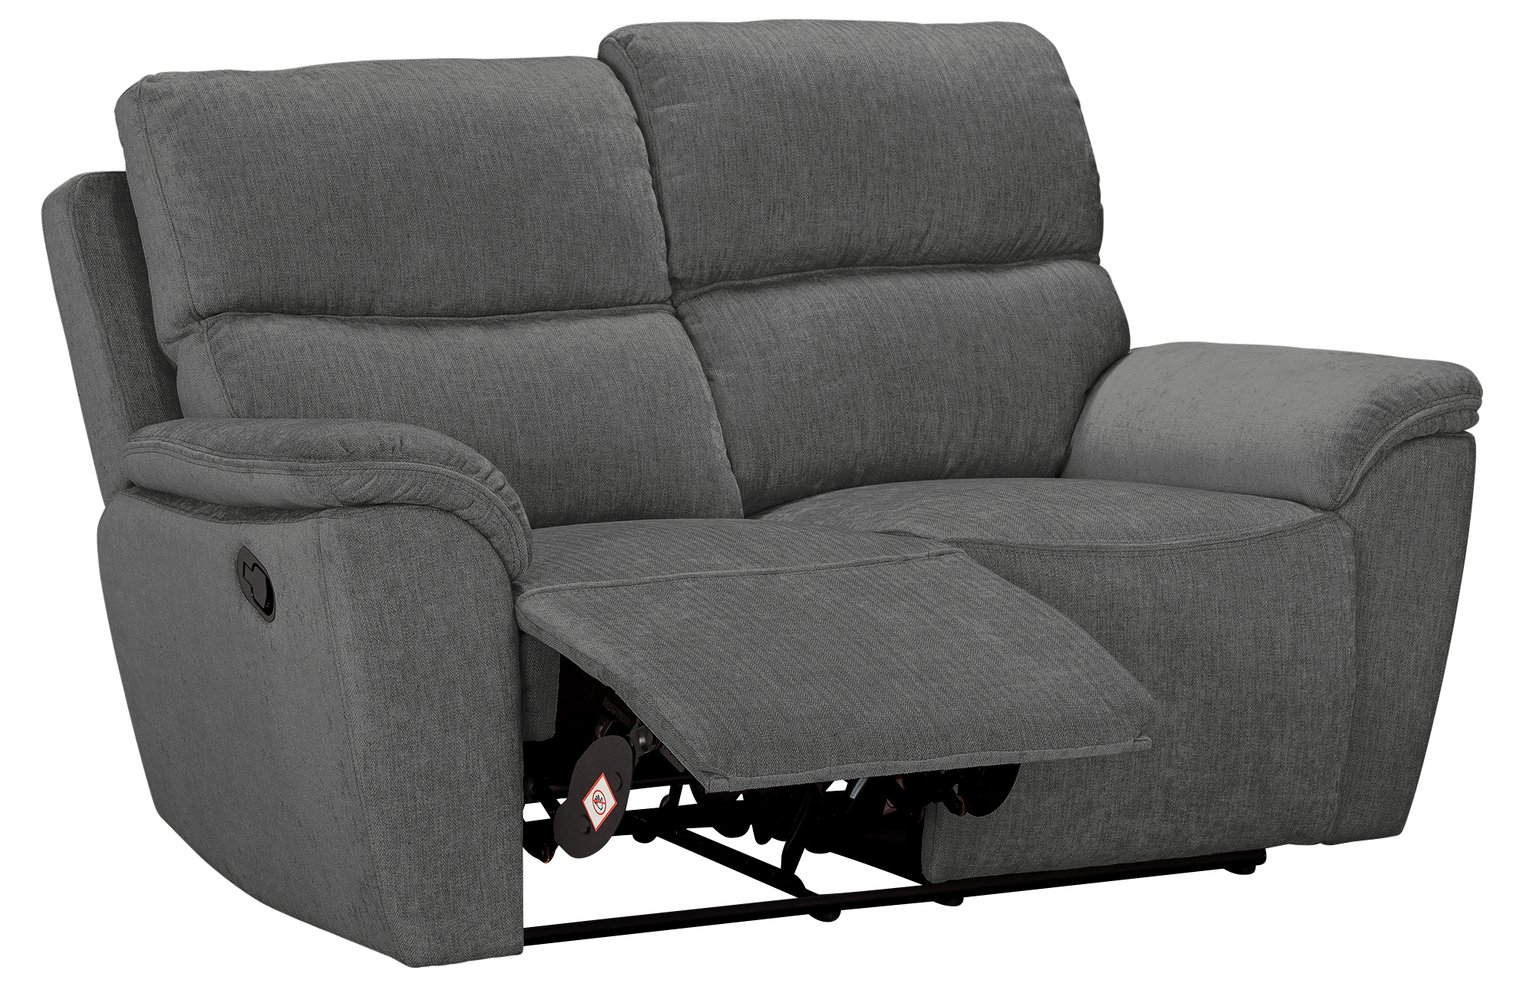 Argos Home Sandy 2 Seater Manual Recliner Sofa - Charcoal